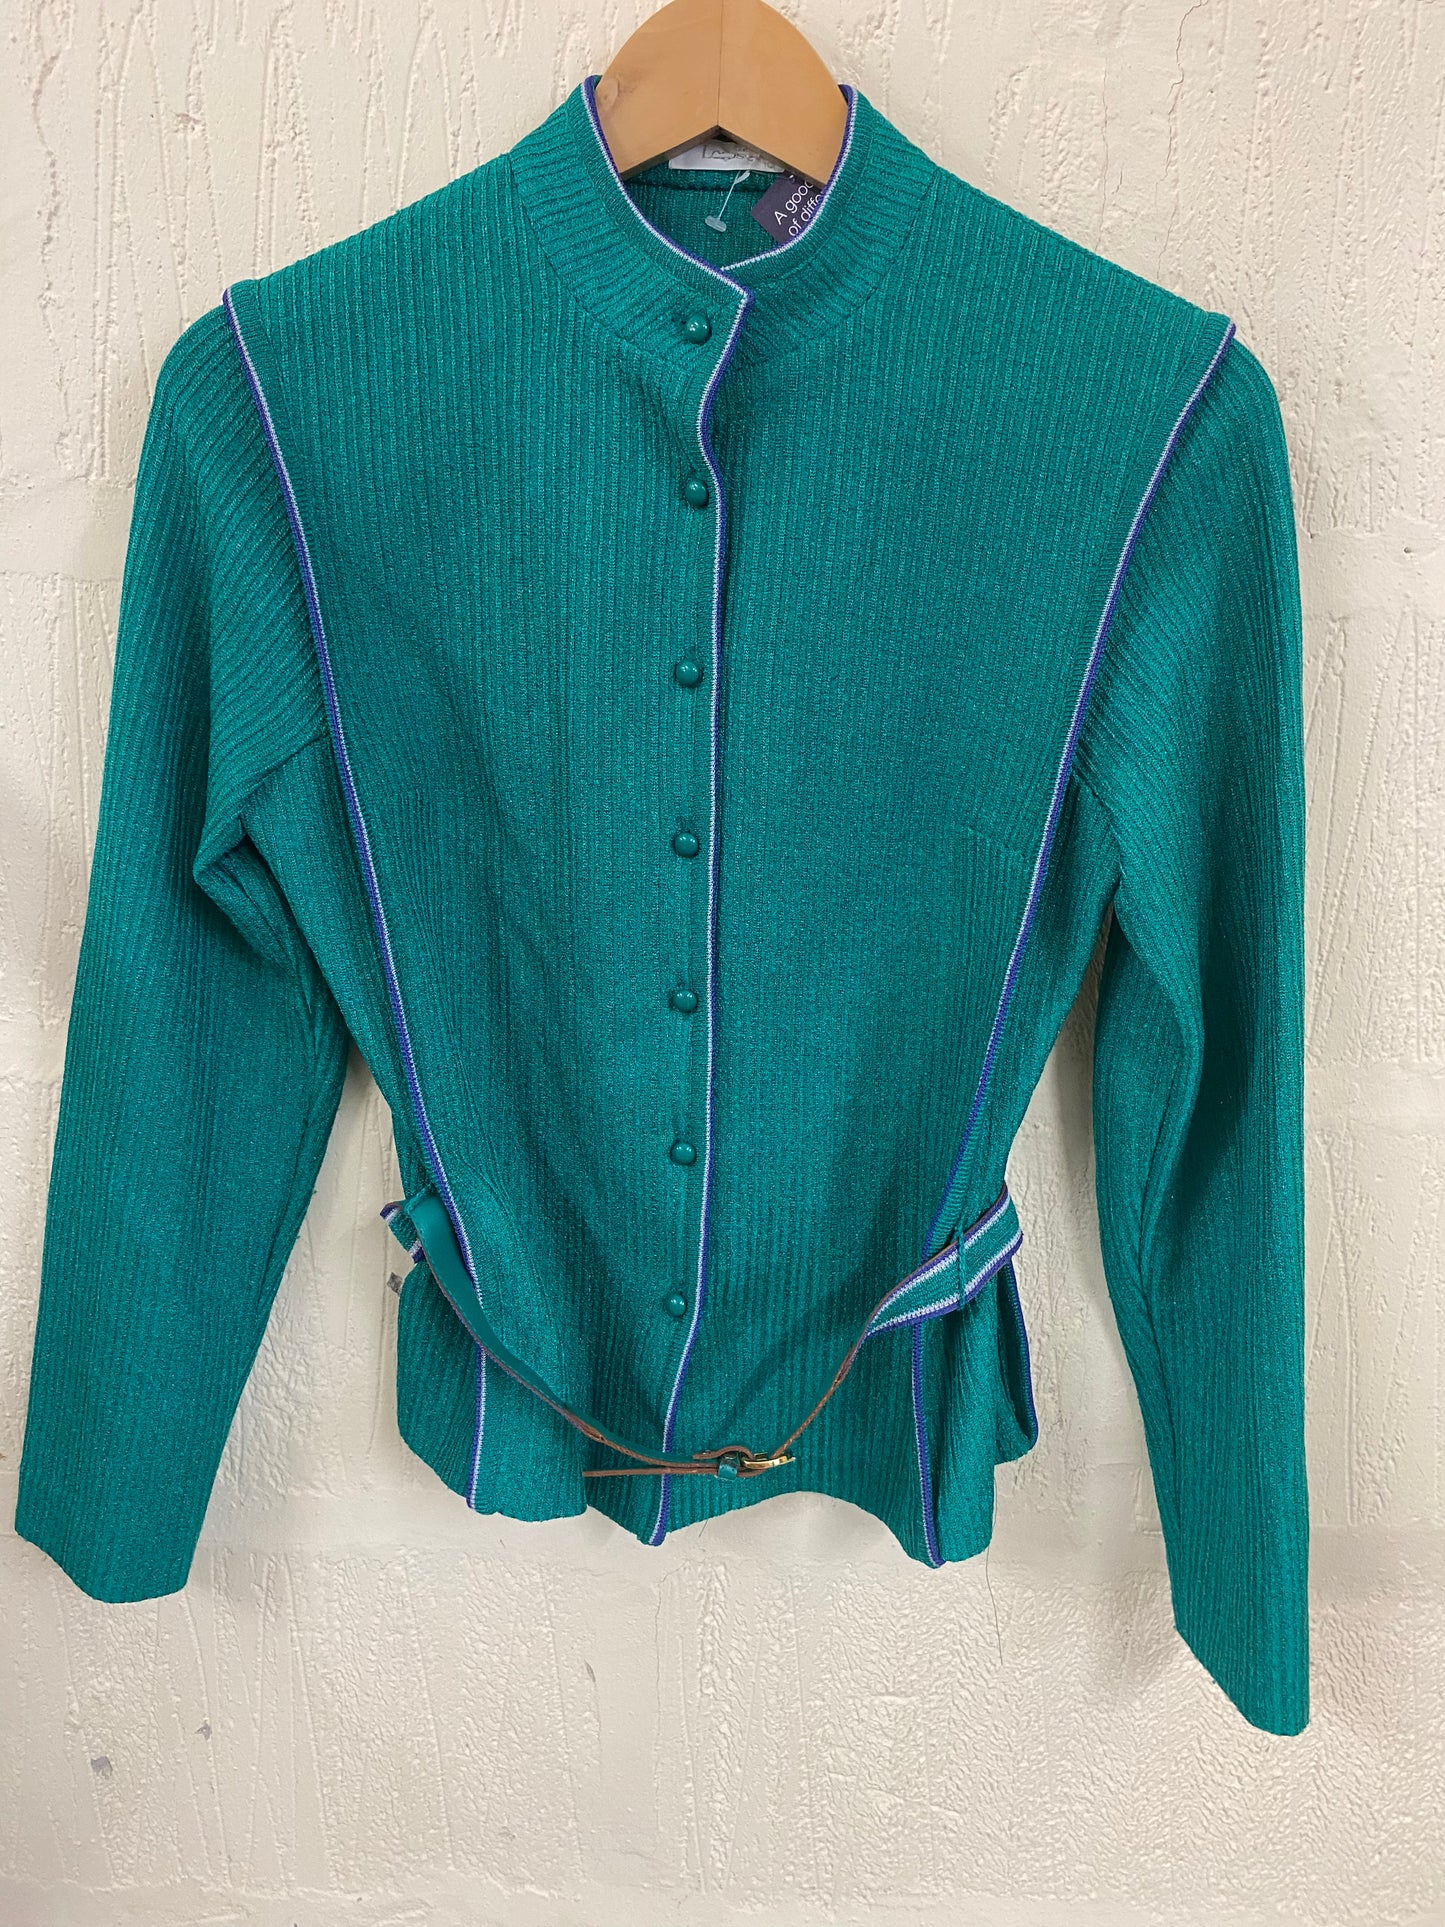 Vintage Geeky Sport Teal and Navy Cardigan with Belt Size 8